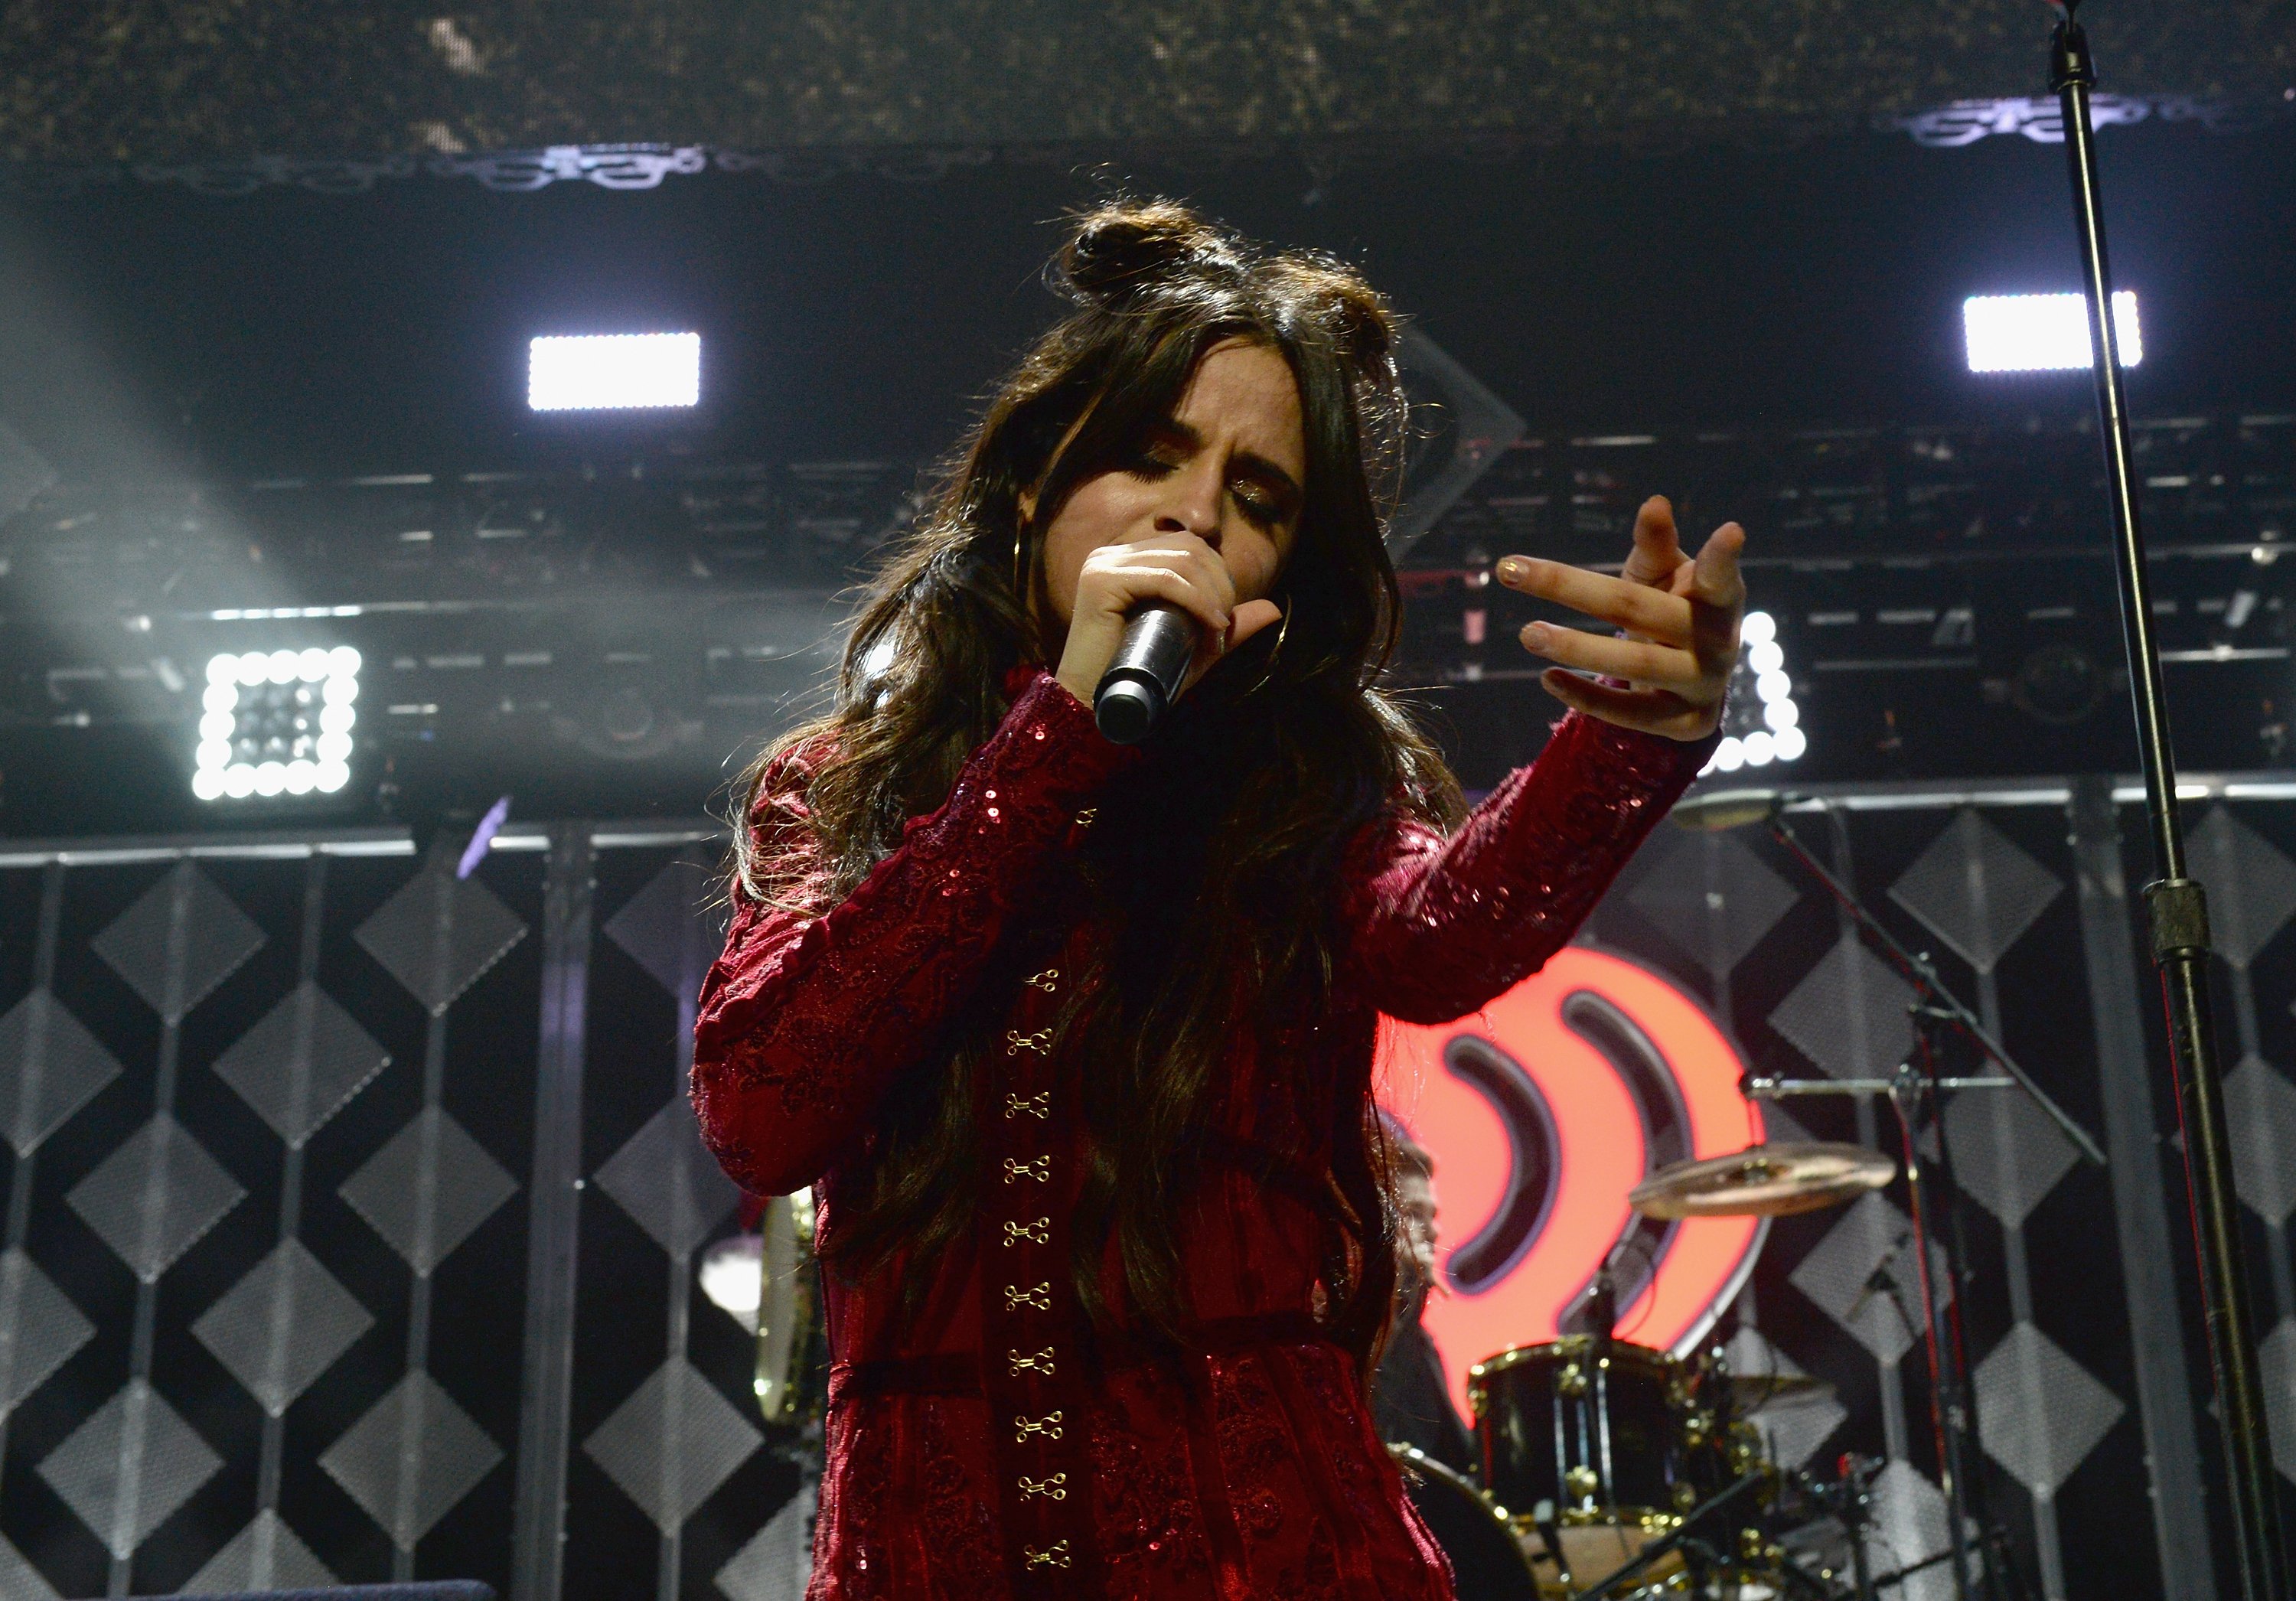 Camila Cabello of Fifth Harmony performs at the Y100's Jingle Ball 2016 at BB&T Center on December 18, 2016 in Sunrise, Florida